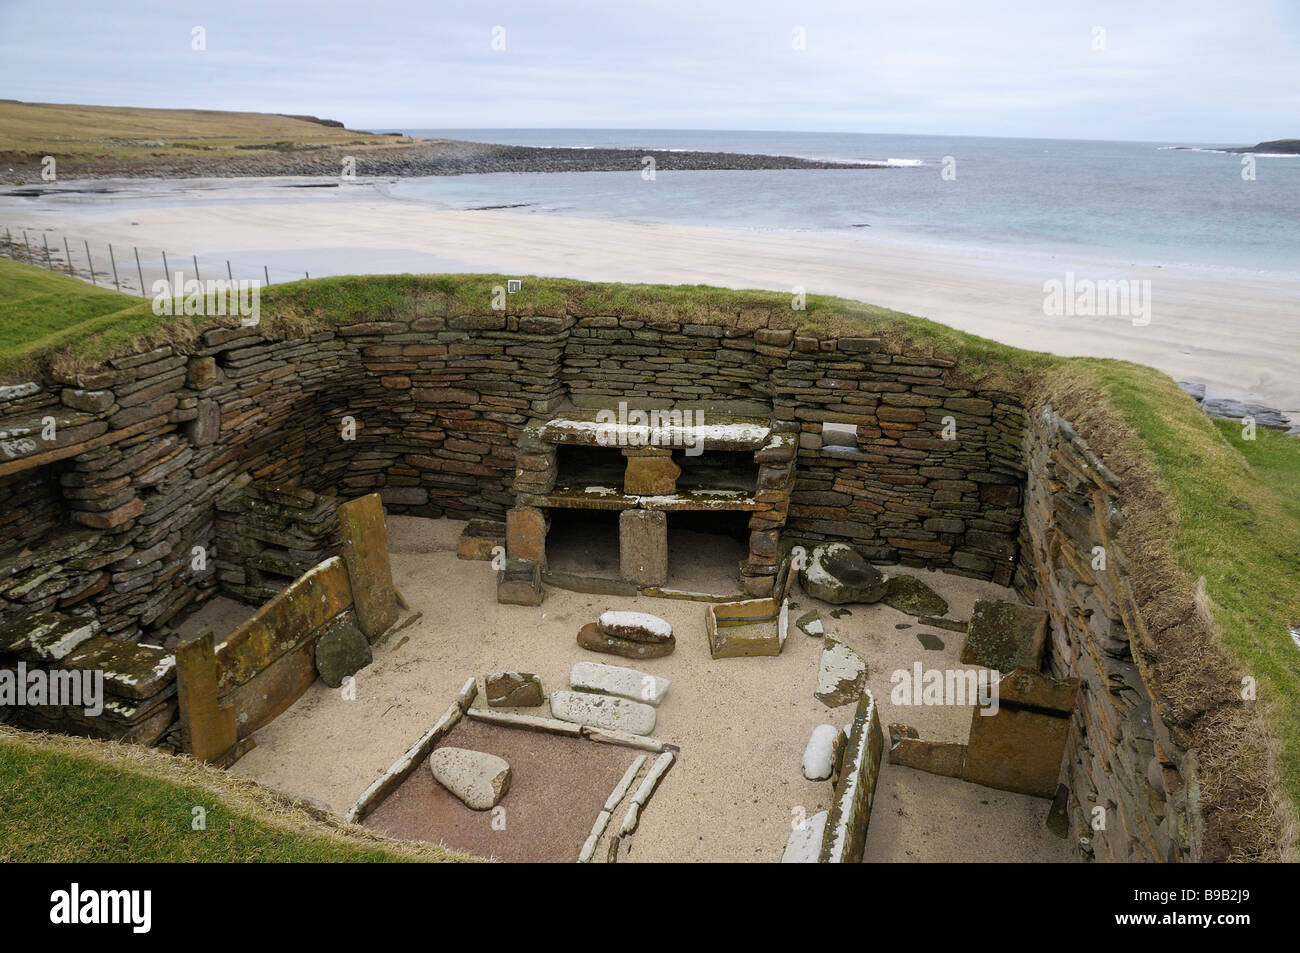 One of the ancient roundhouses excavated at Skara Brae, Orkney, Scotland, with beach and sea in background. Stock Photo